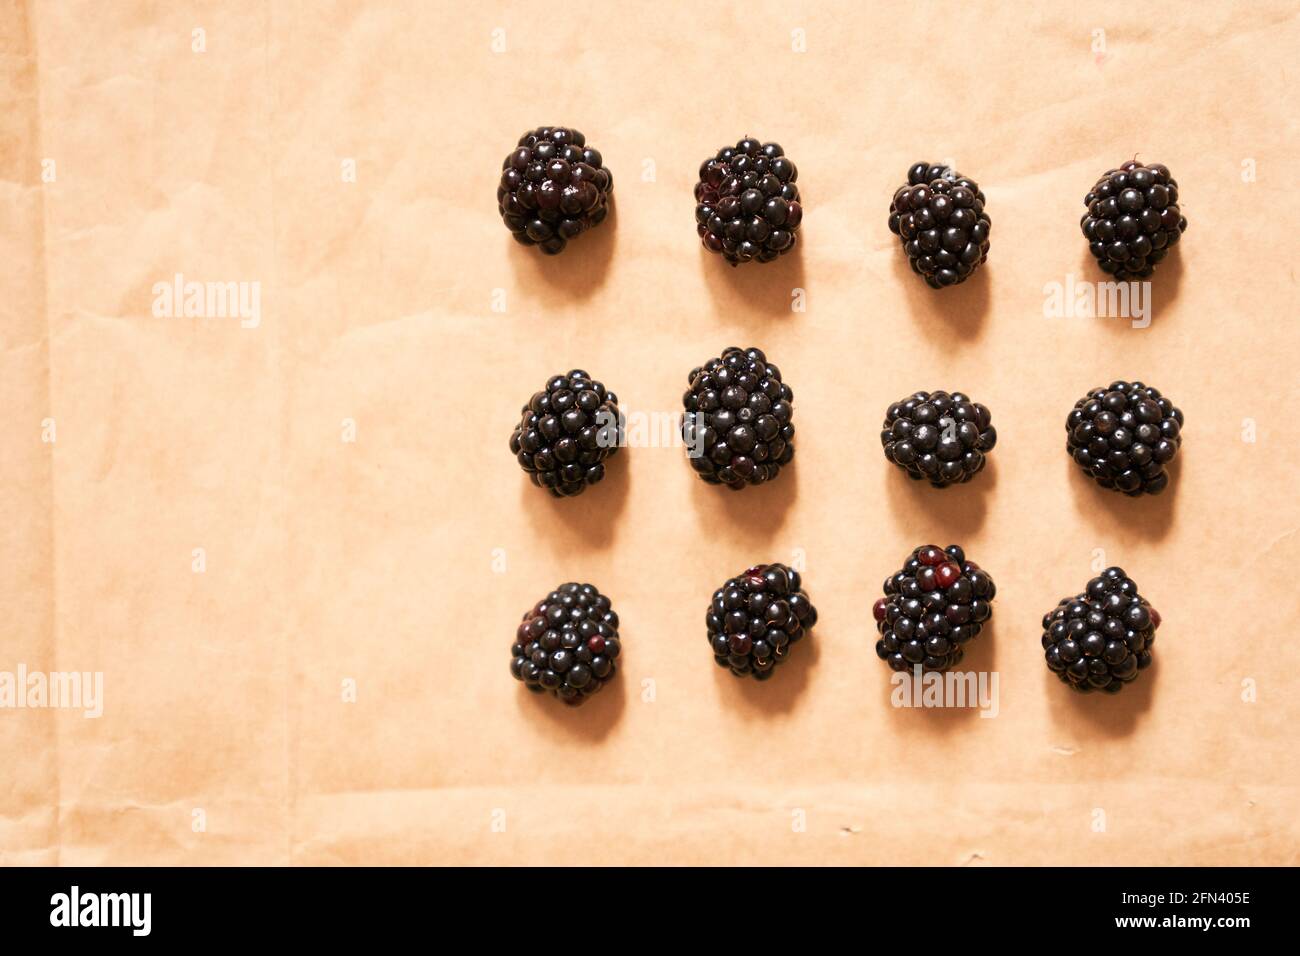 Twelve blackberries on a beige craft paper background. Berries laid out in the form of a rectangle. Horizontal card with copy space. Healthy, delicious, natural vegetarian background. Stock Photo